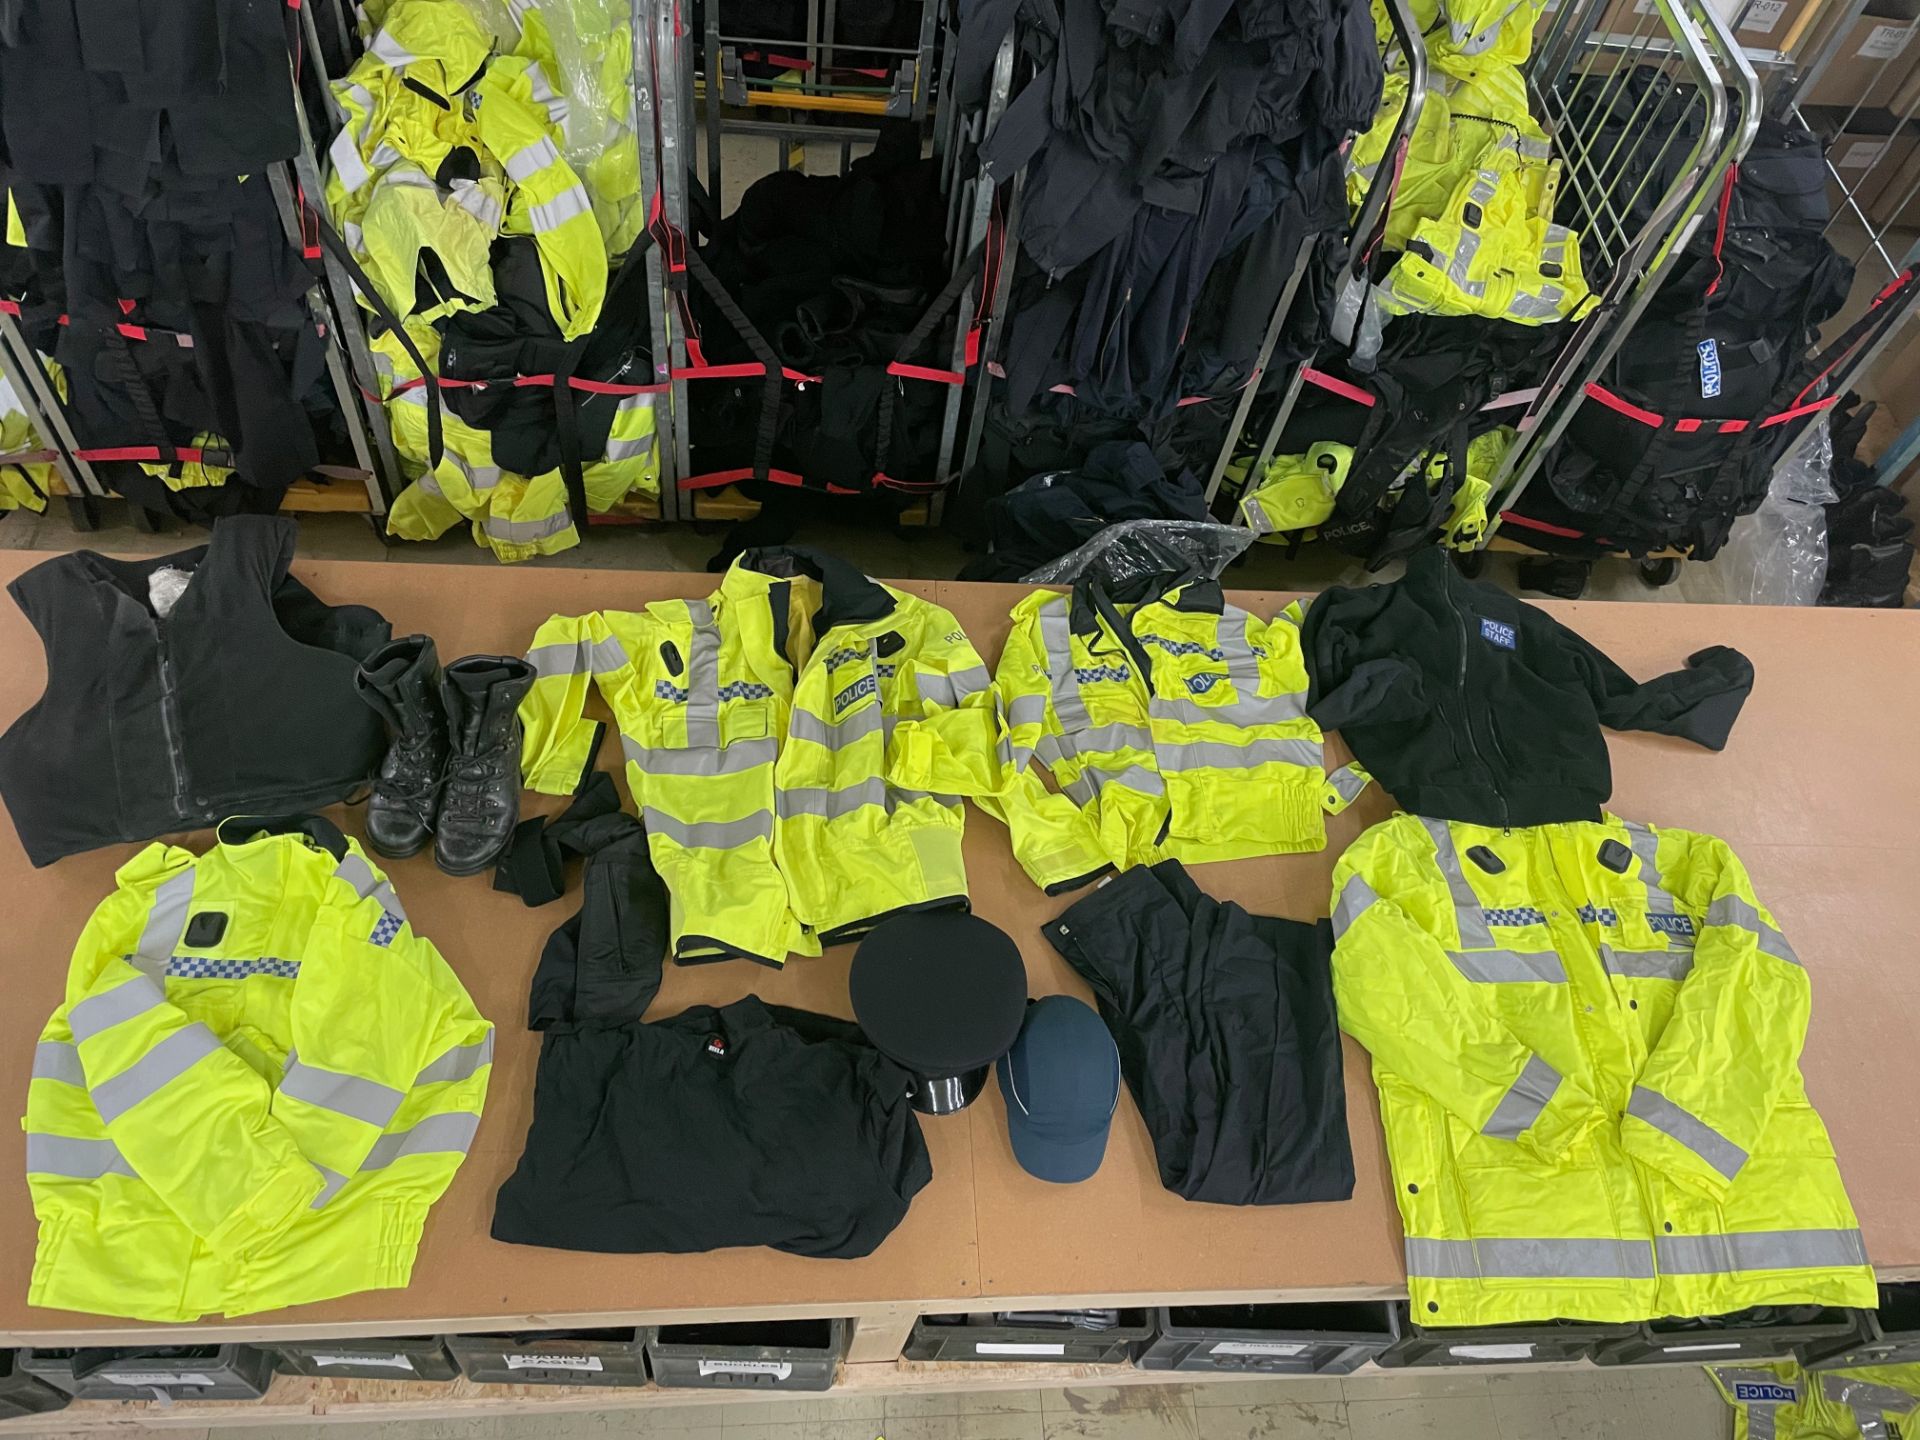 5 X BAGS STUFFED WITH EX POLICE UNIFORM CLOTHING & ACCESSORIES - RRP £1375.00 - NO VAT ON HAMMER